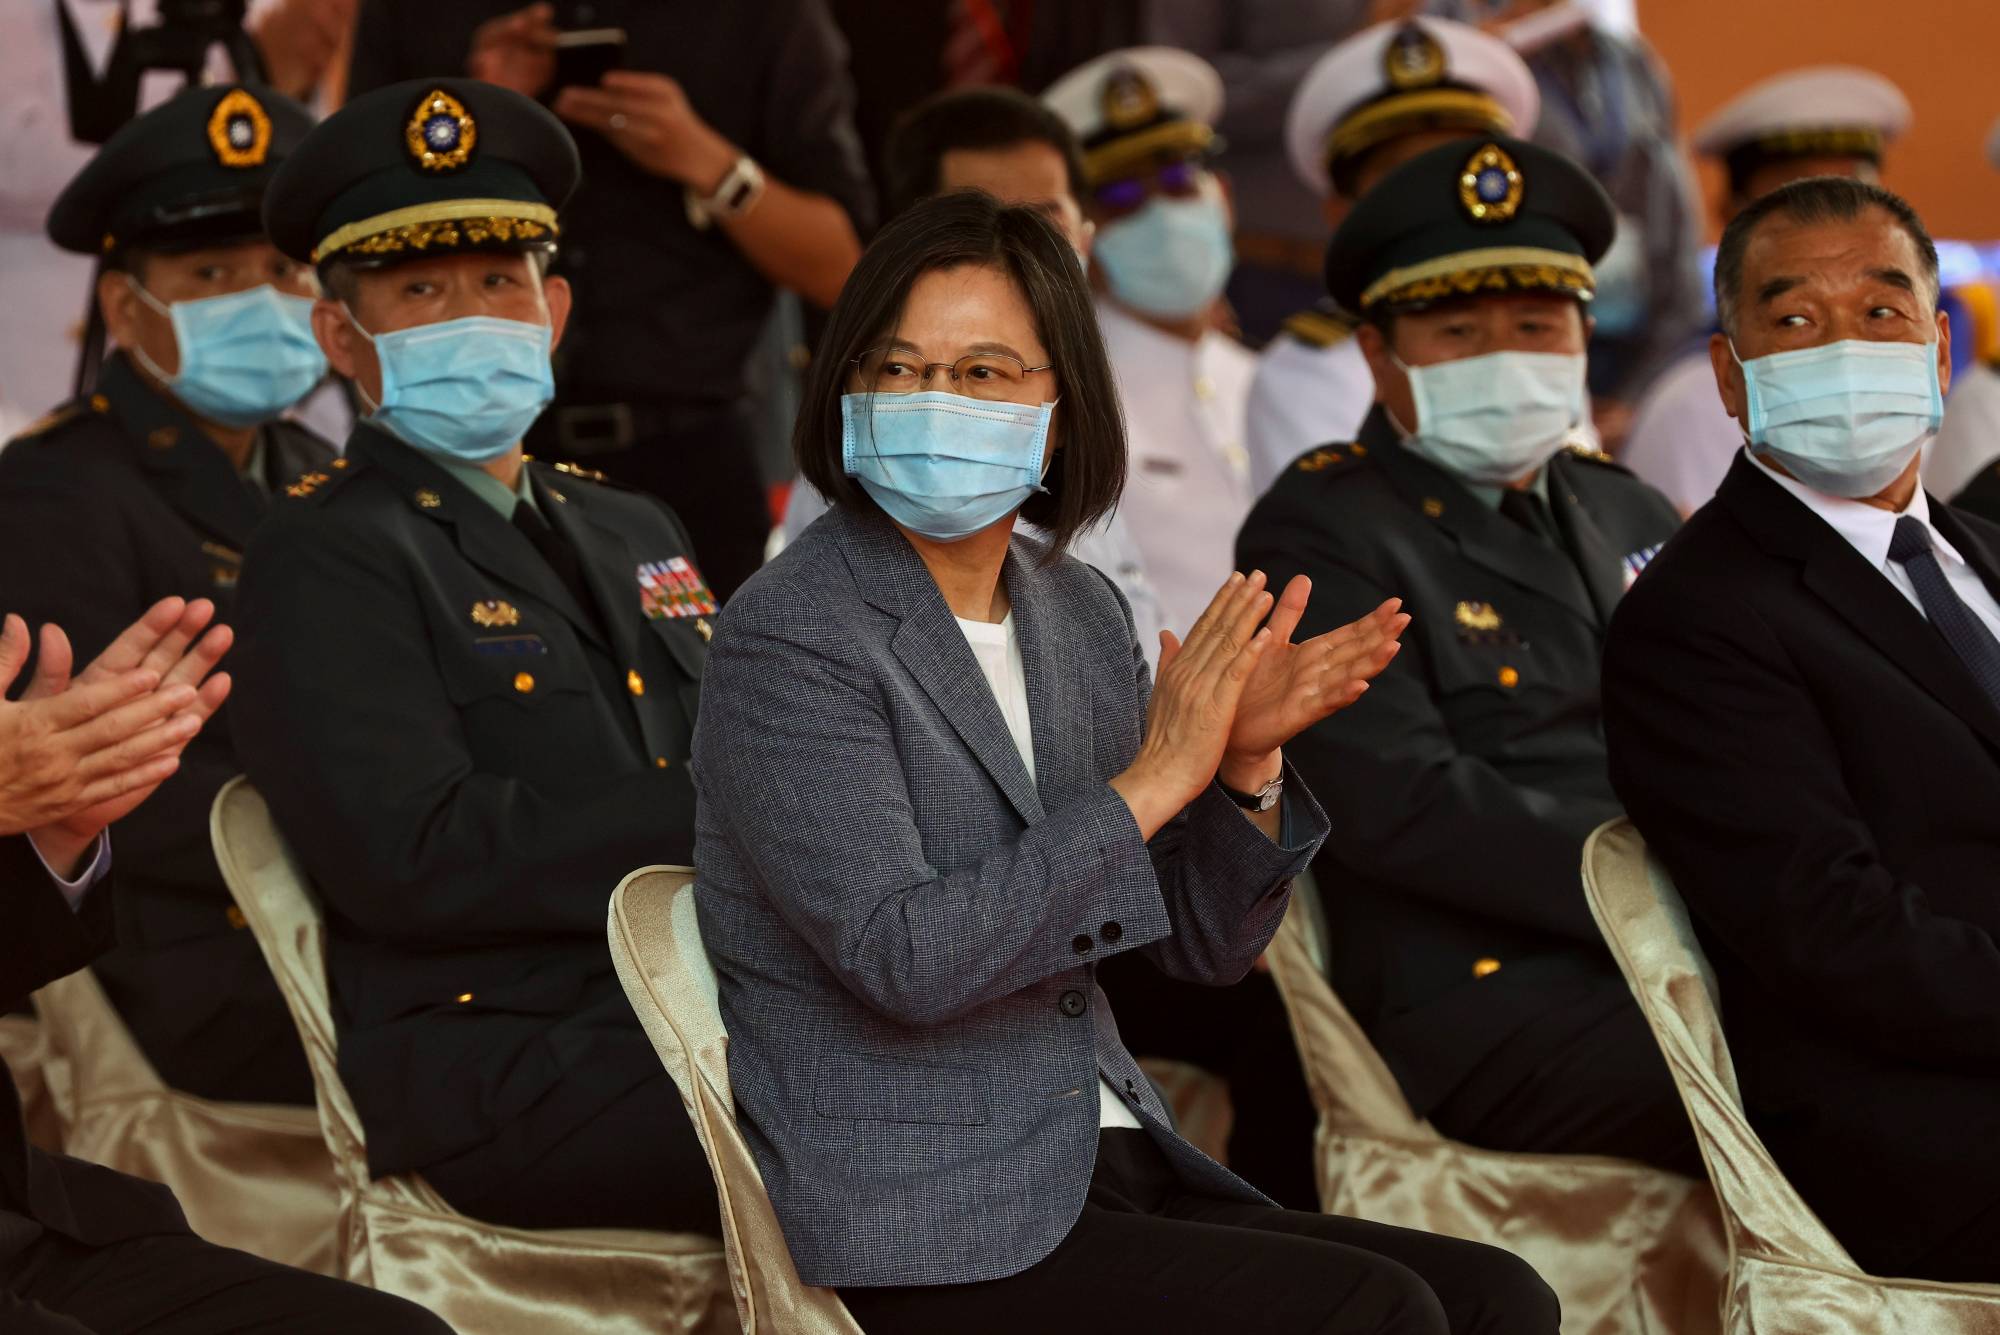 Taiwan President Tsai Ing-wen applauds during the launch ceremony for the Taiwanese Navy's domestically built amphibious transport dock Yushan in Kaohsiung on April 13. | REUTERS